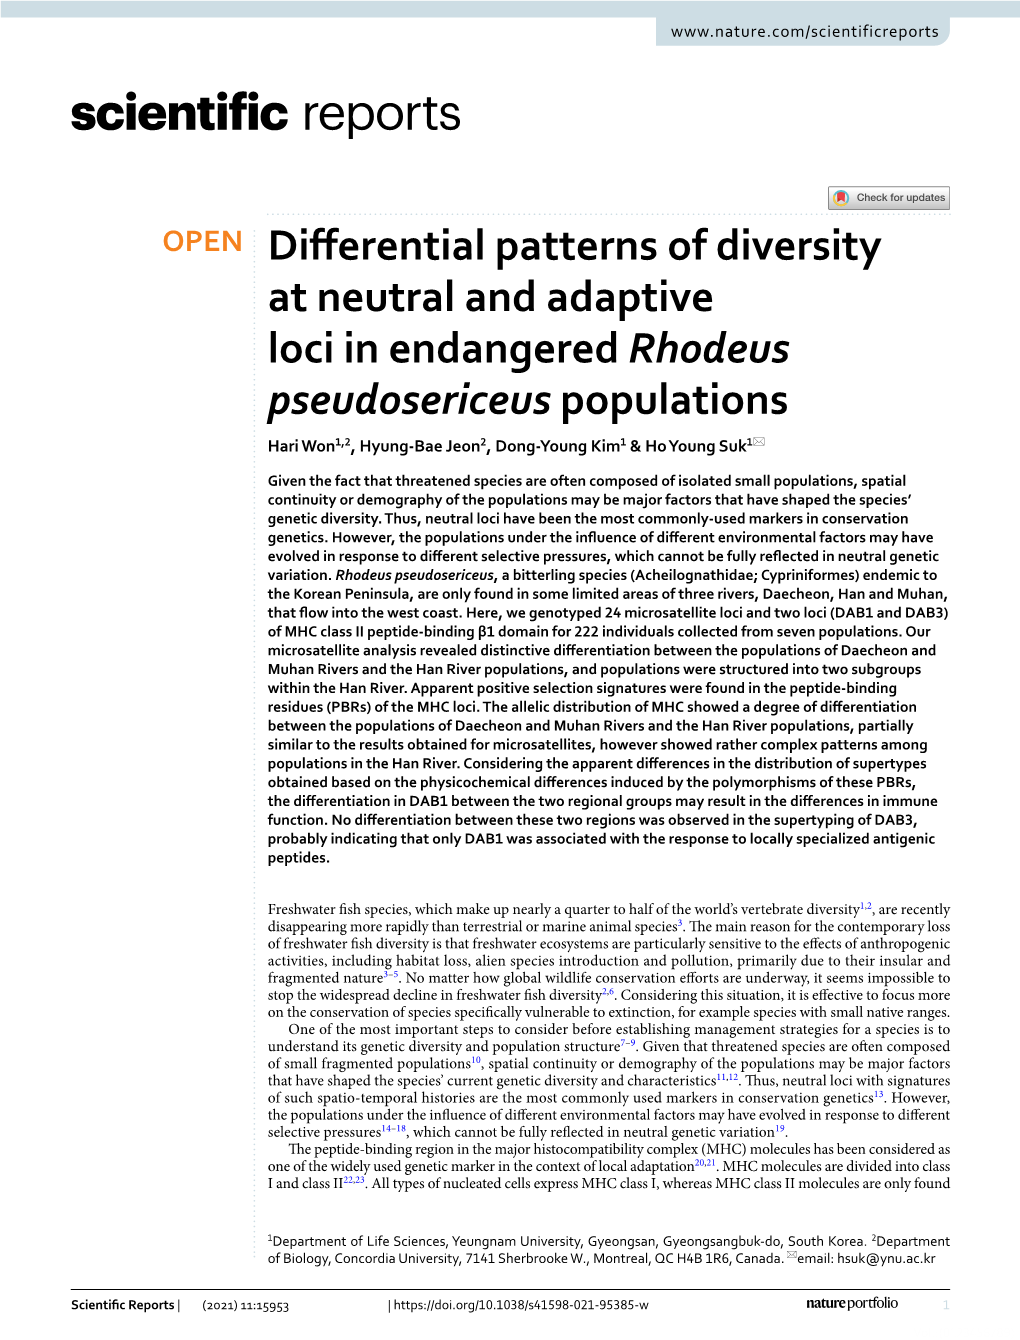 Differential Patterns of Diversity at Neutral and Adaptive Loci In